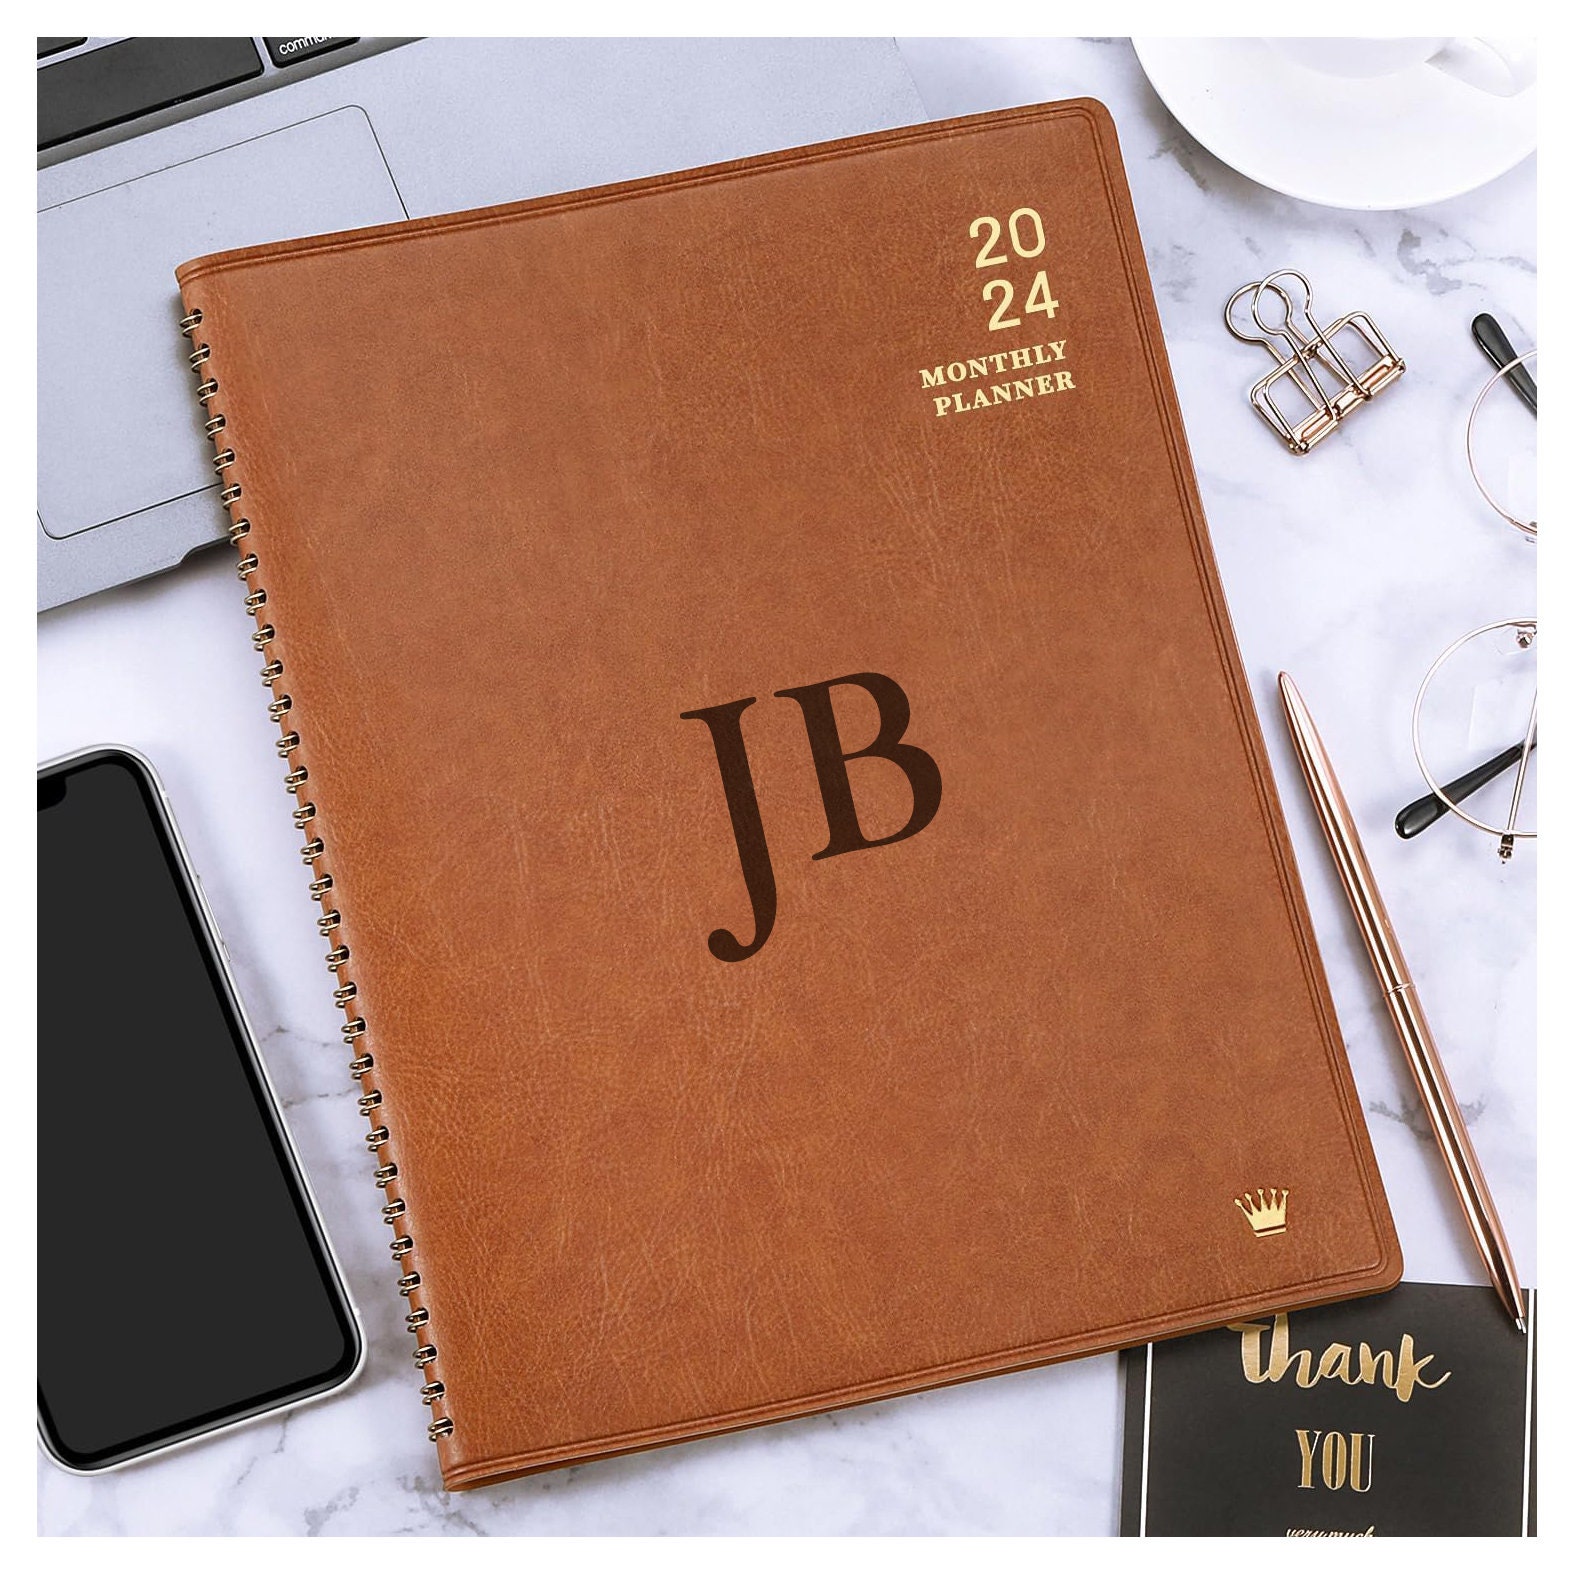 2024 Daily Journal Planner  British Tan Traditional Leather